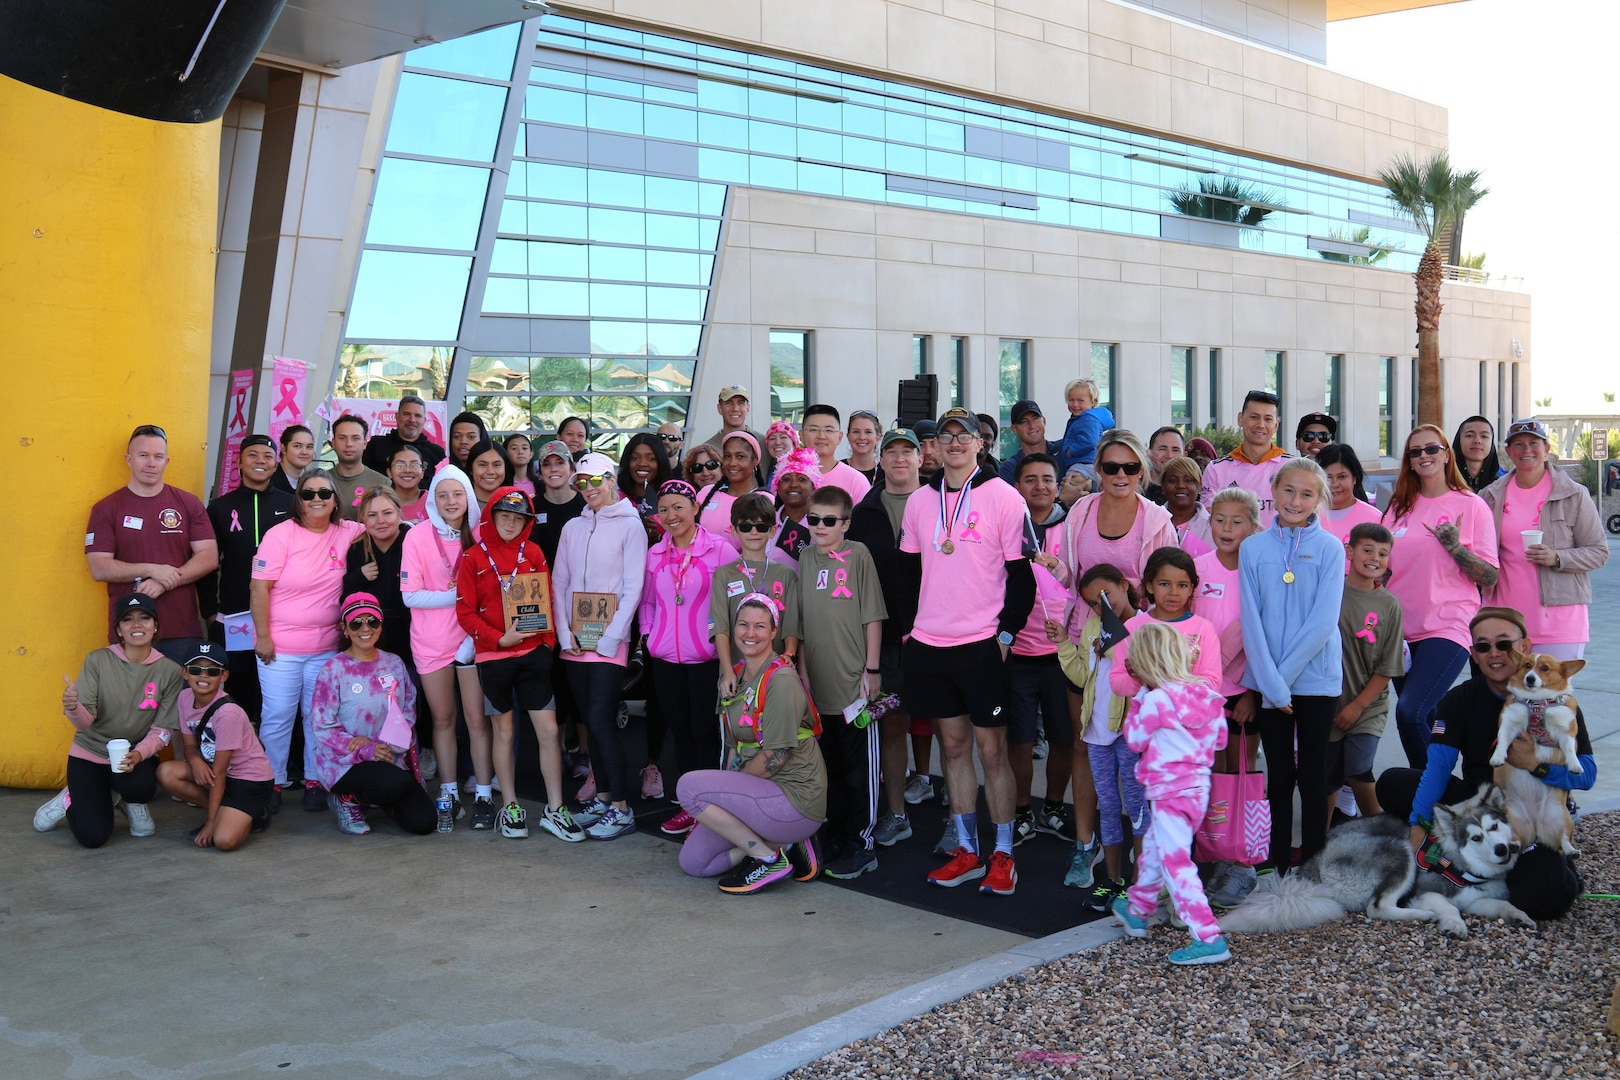 Group of 50 people posing for picture while wearing various pink attire to commemorate breast cancer awareness month.